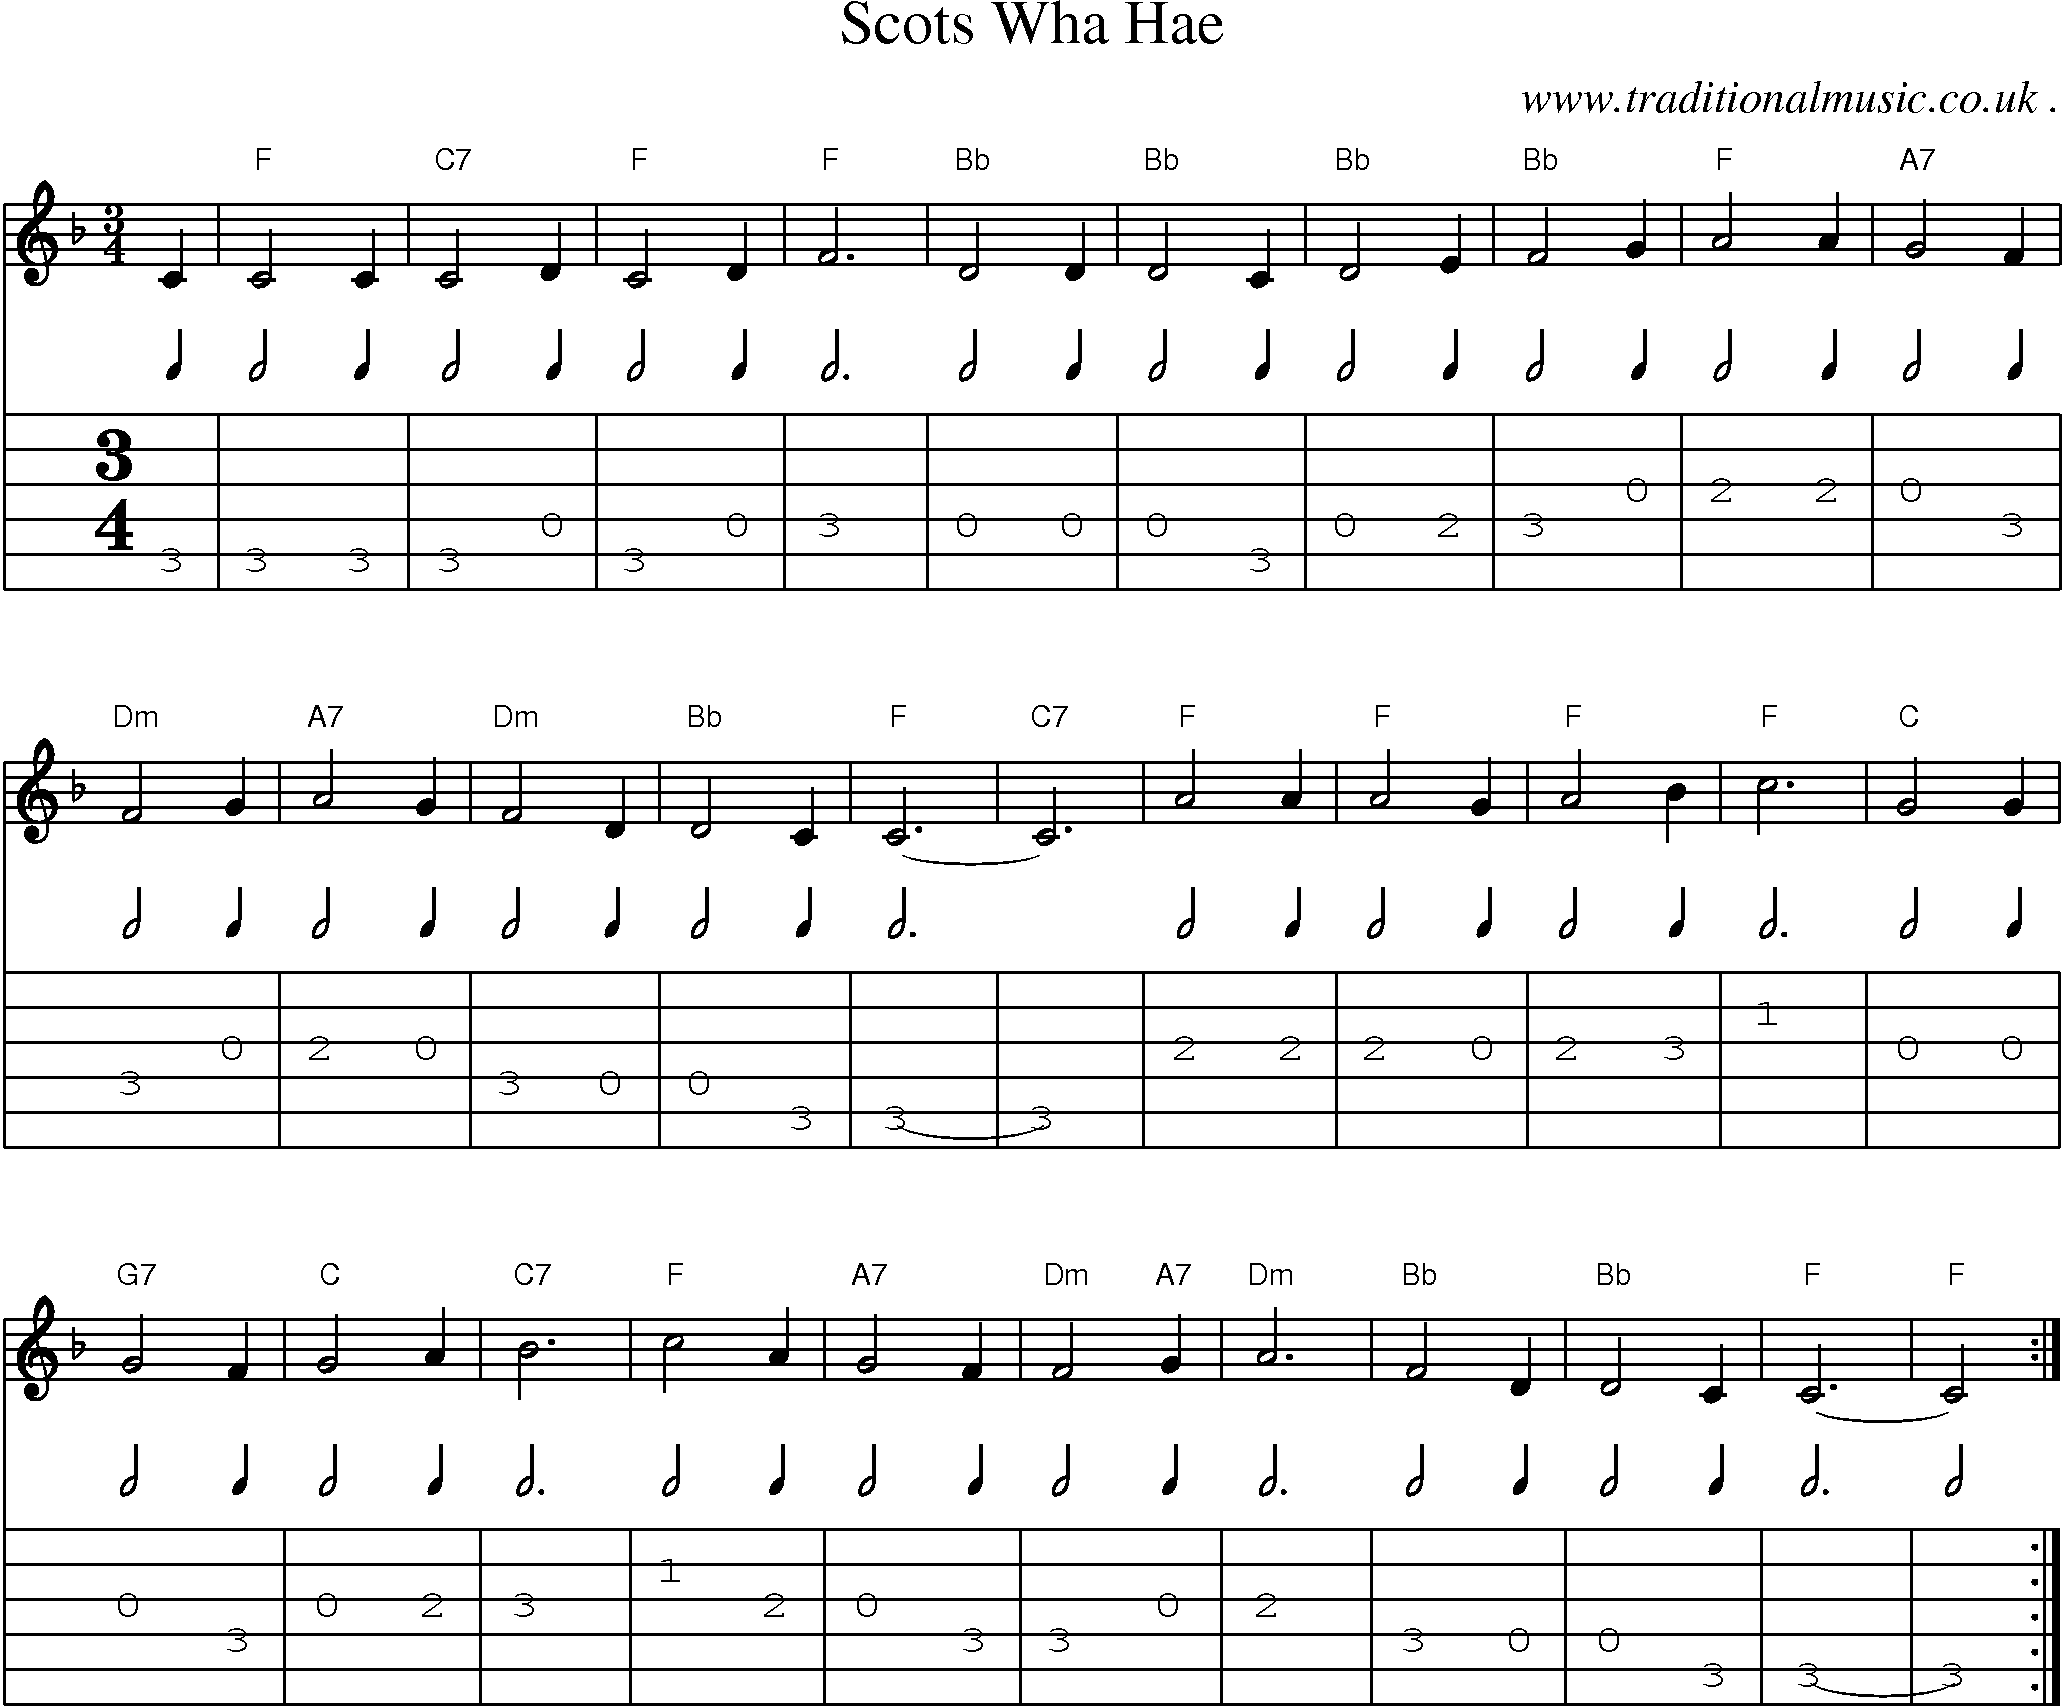 Sheet-Music and Guitar Tabs for Scots Wha Hae